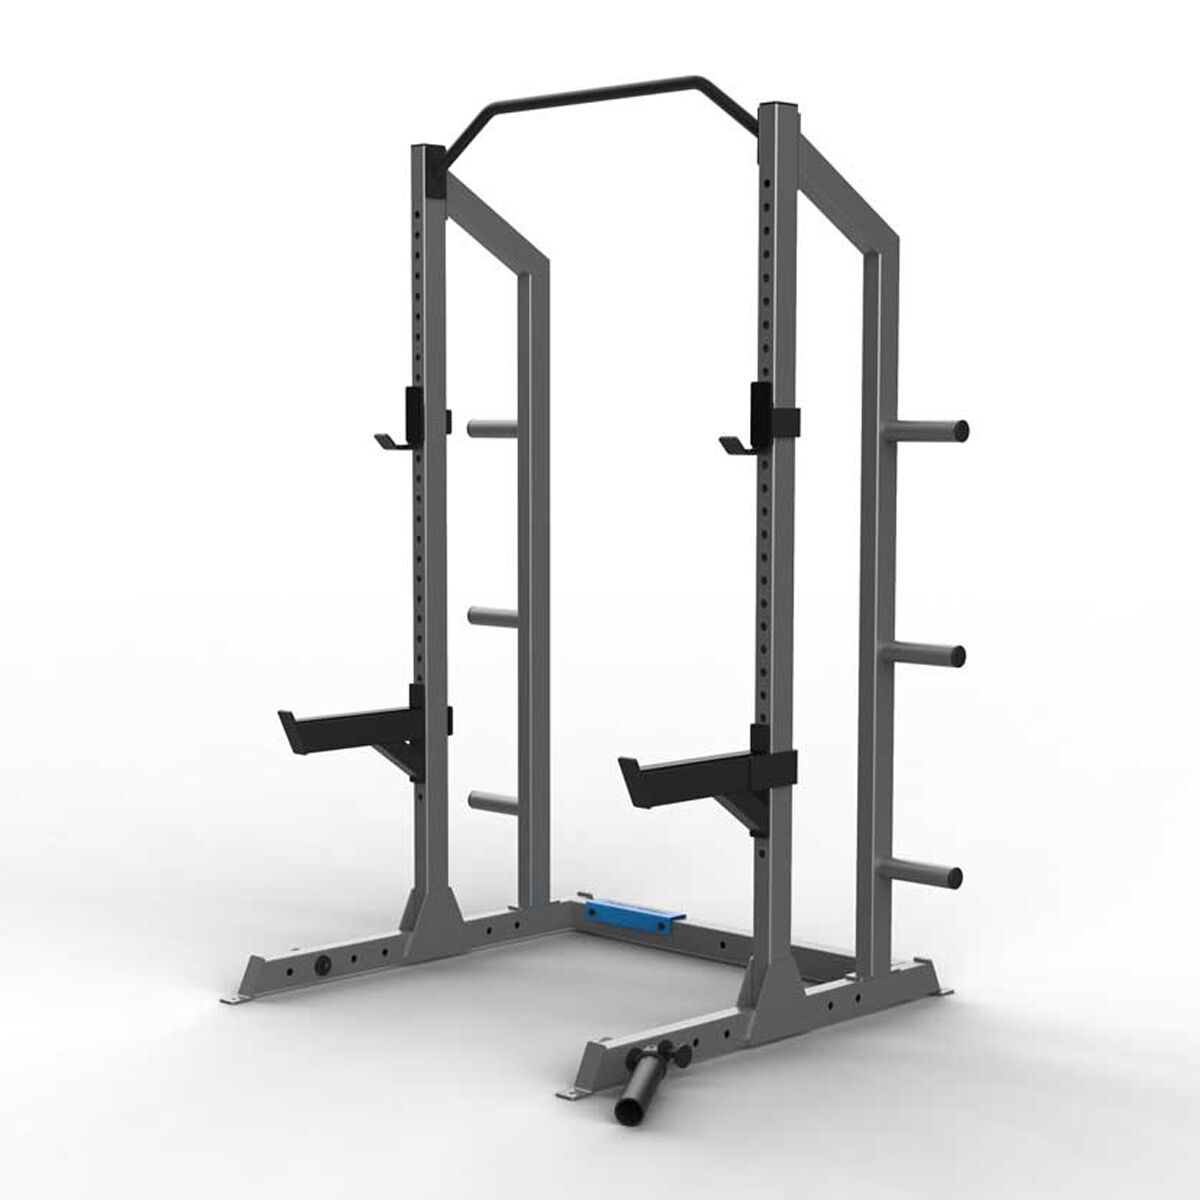 Femor Professional Squat Rack Stand Adjustable 104cm-168cm Heavy Duty Solid Steel Gym Barbell Power Stand Support 